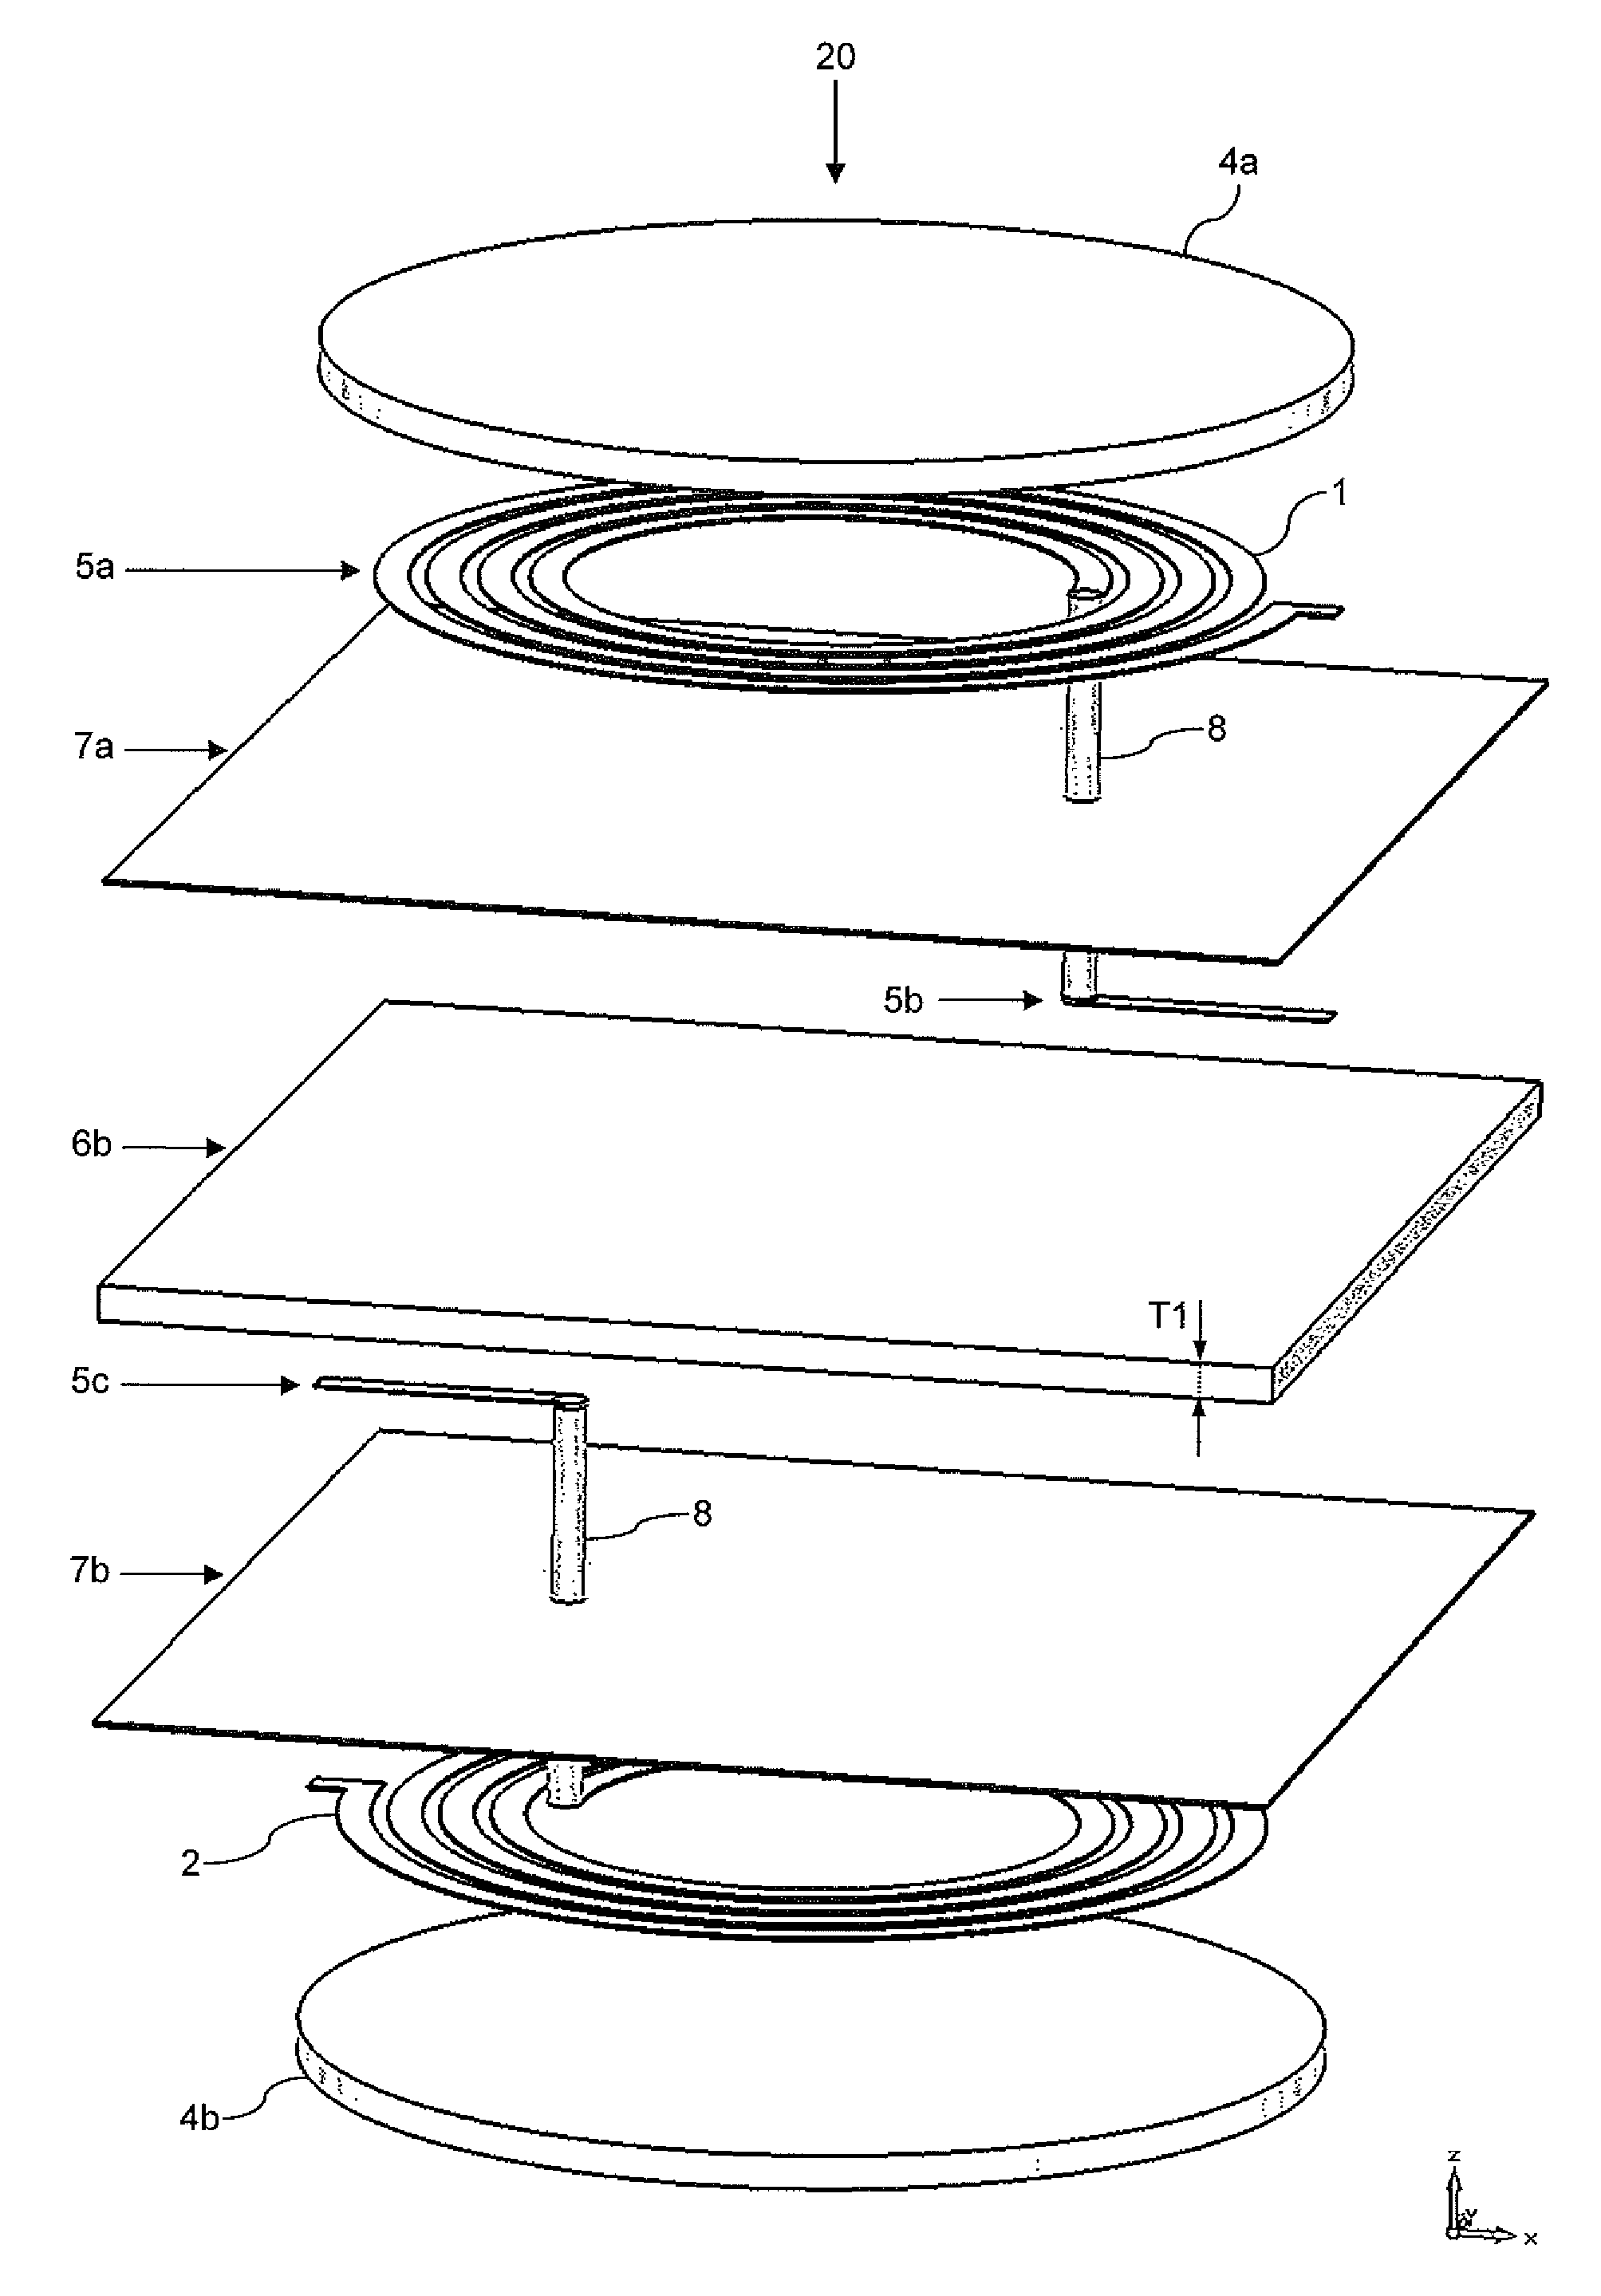 Planar transmitter with a layered structure